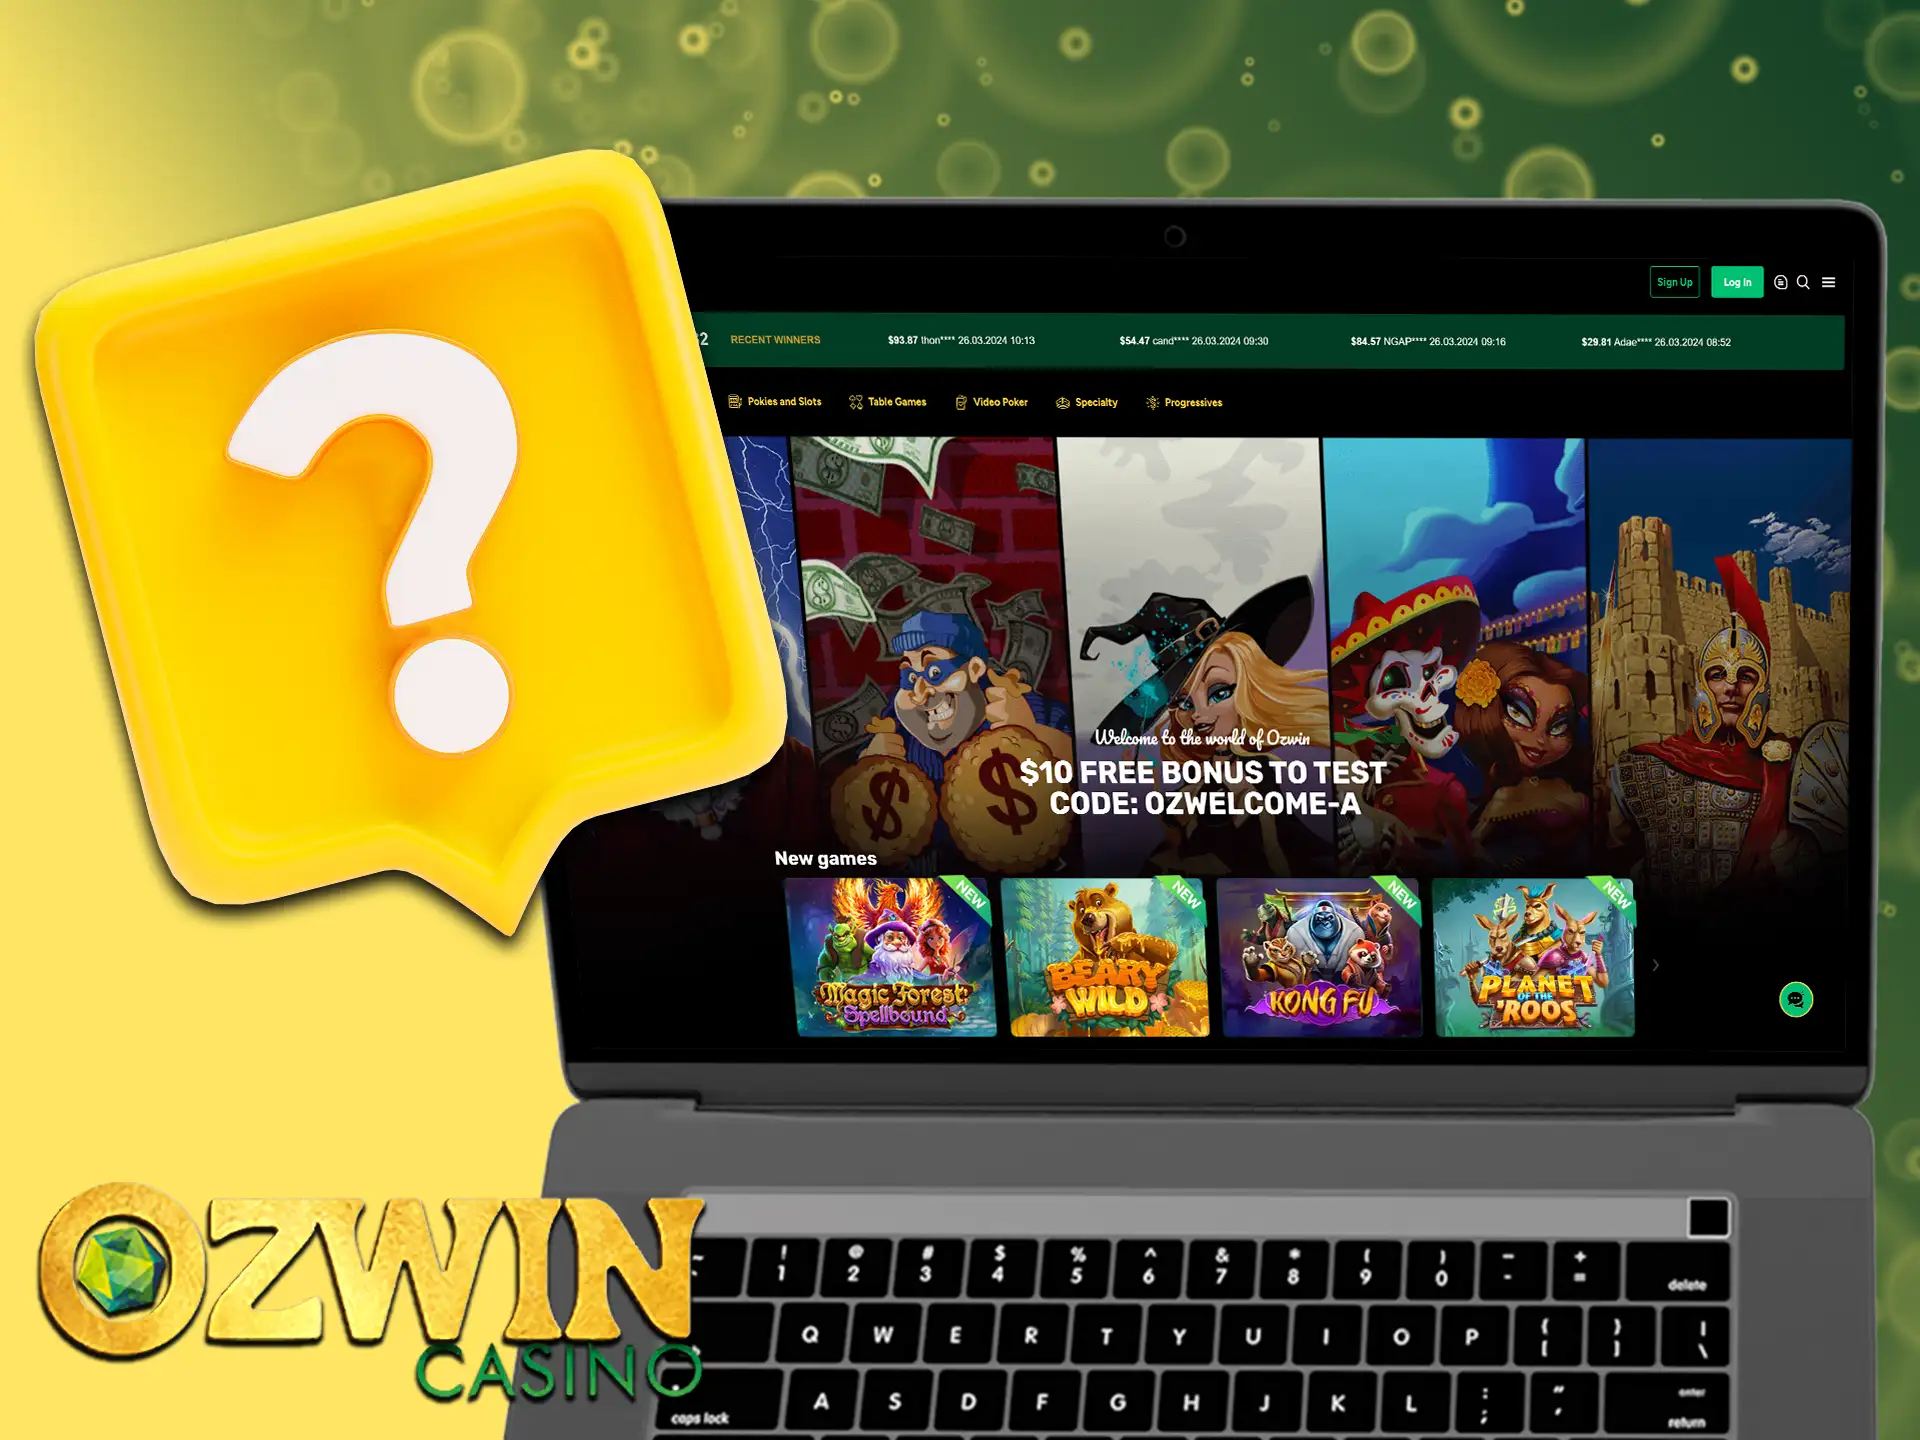 Starting to wager on your favourite casino games at Ozwin is a straightforward process!